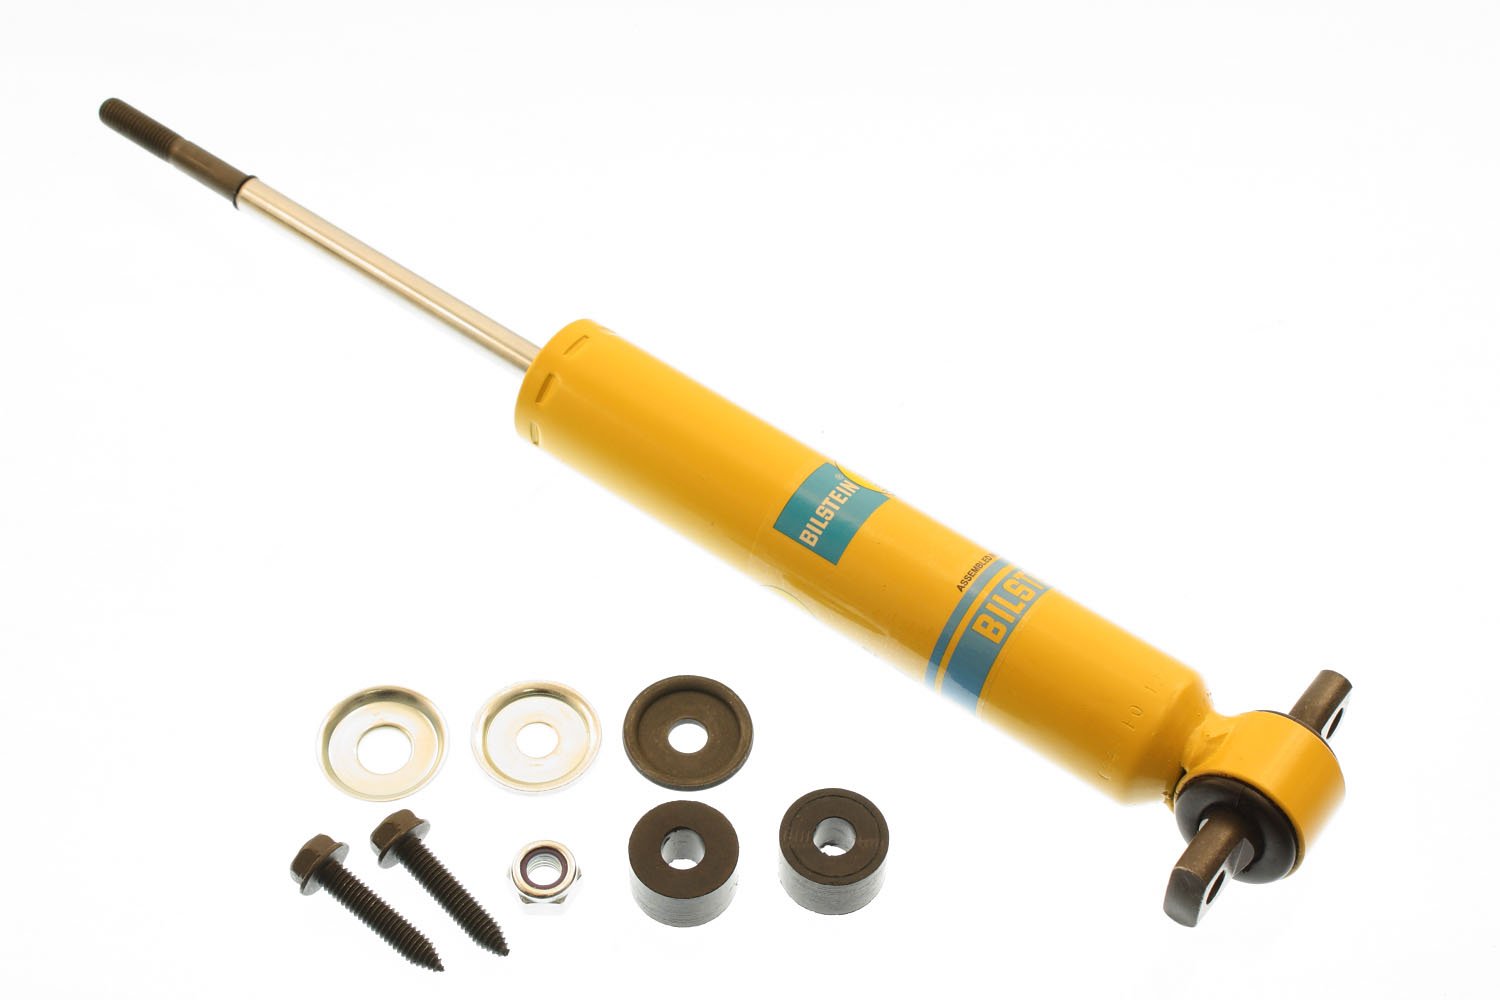 FRONT SHOCK ABSORBER B6 PERFORMANCE BUICK CENTURY 1981-1973, REGAL 1987-1975, CA